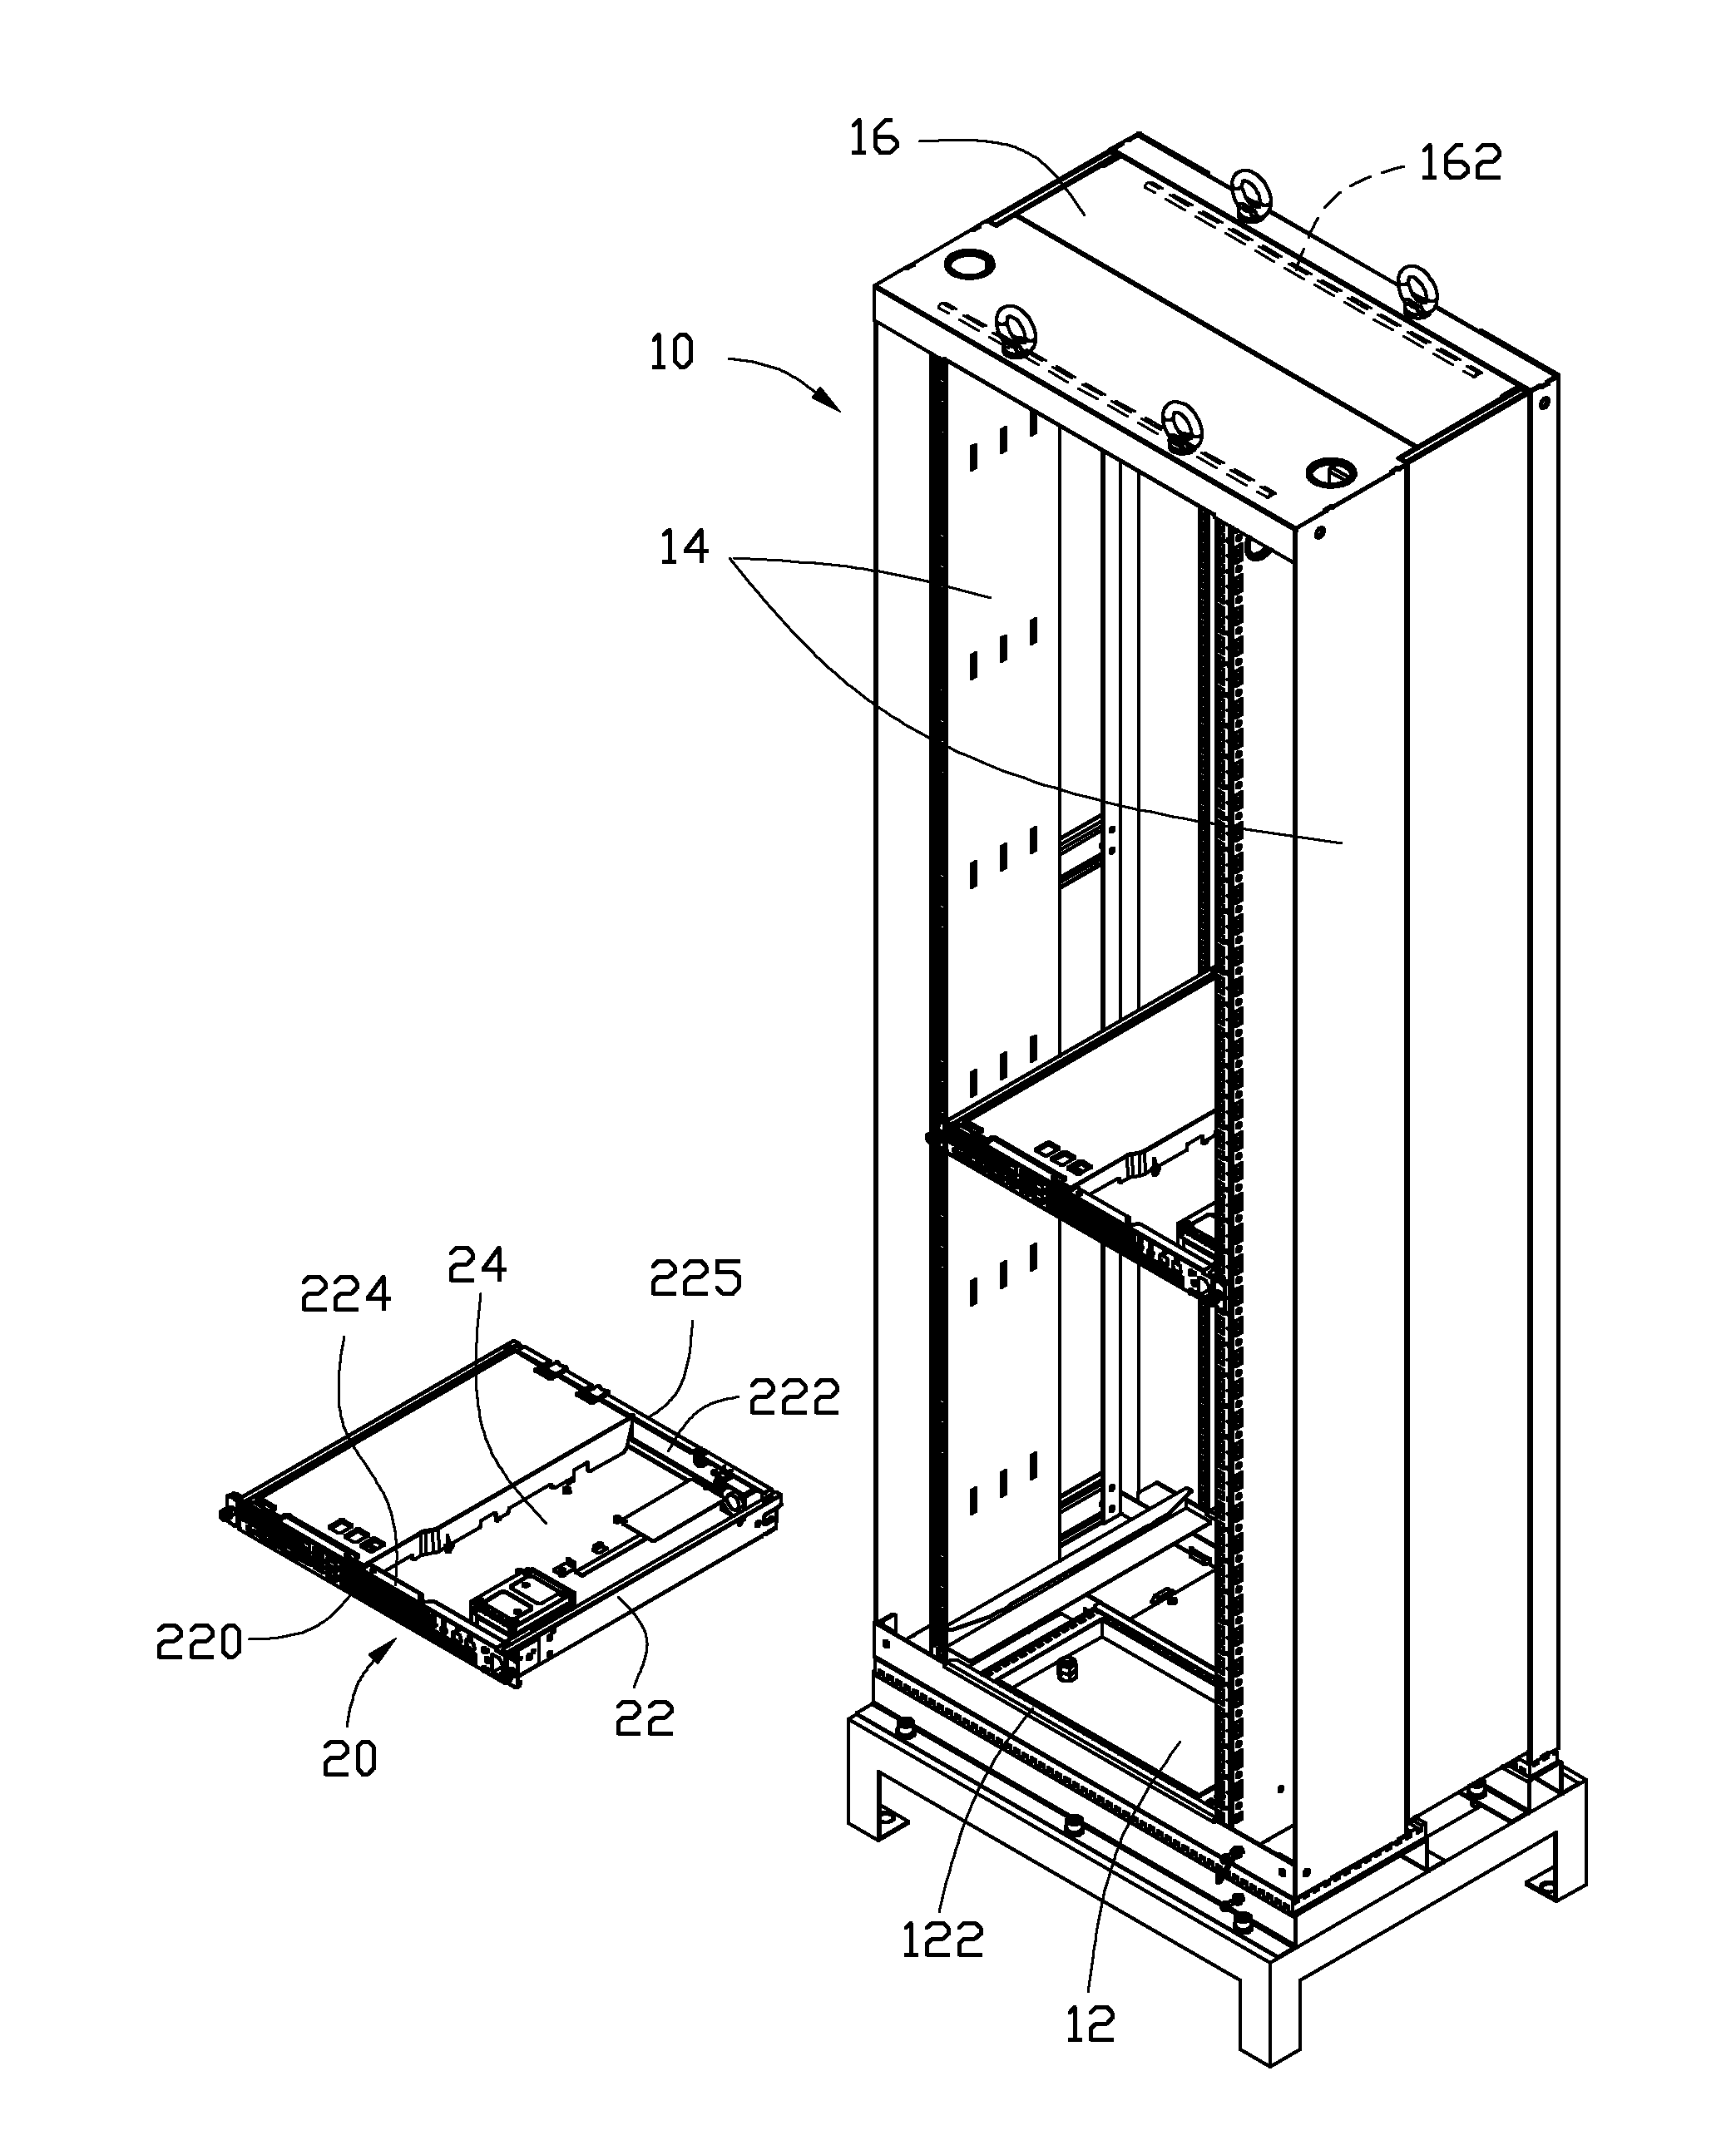 Electronic apparatus with electromagnetic radiation shielding